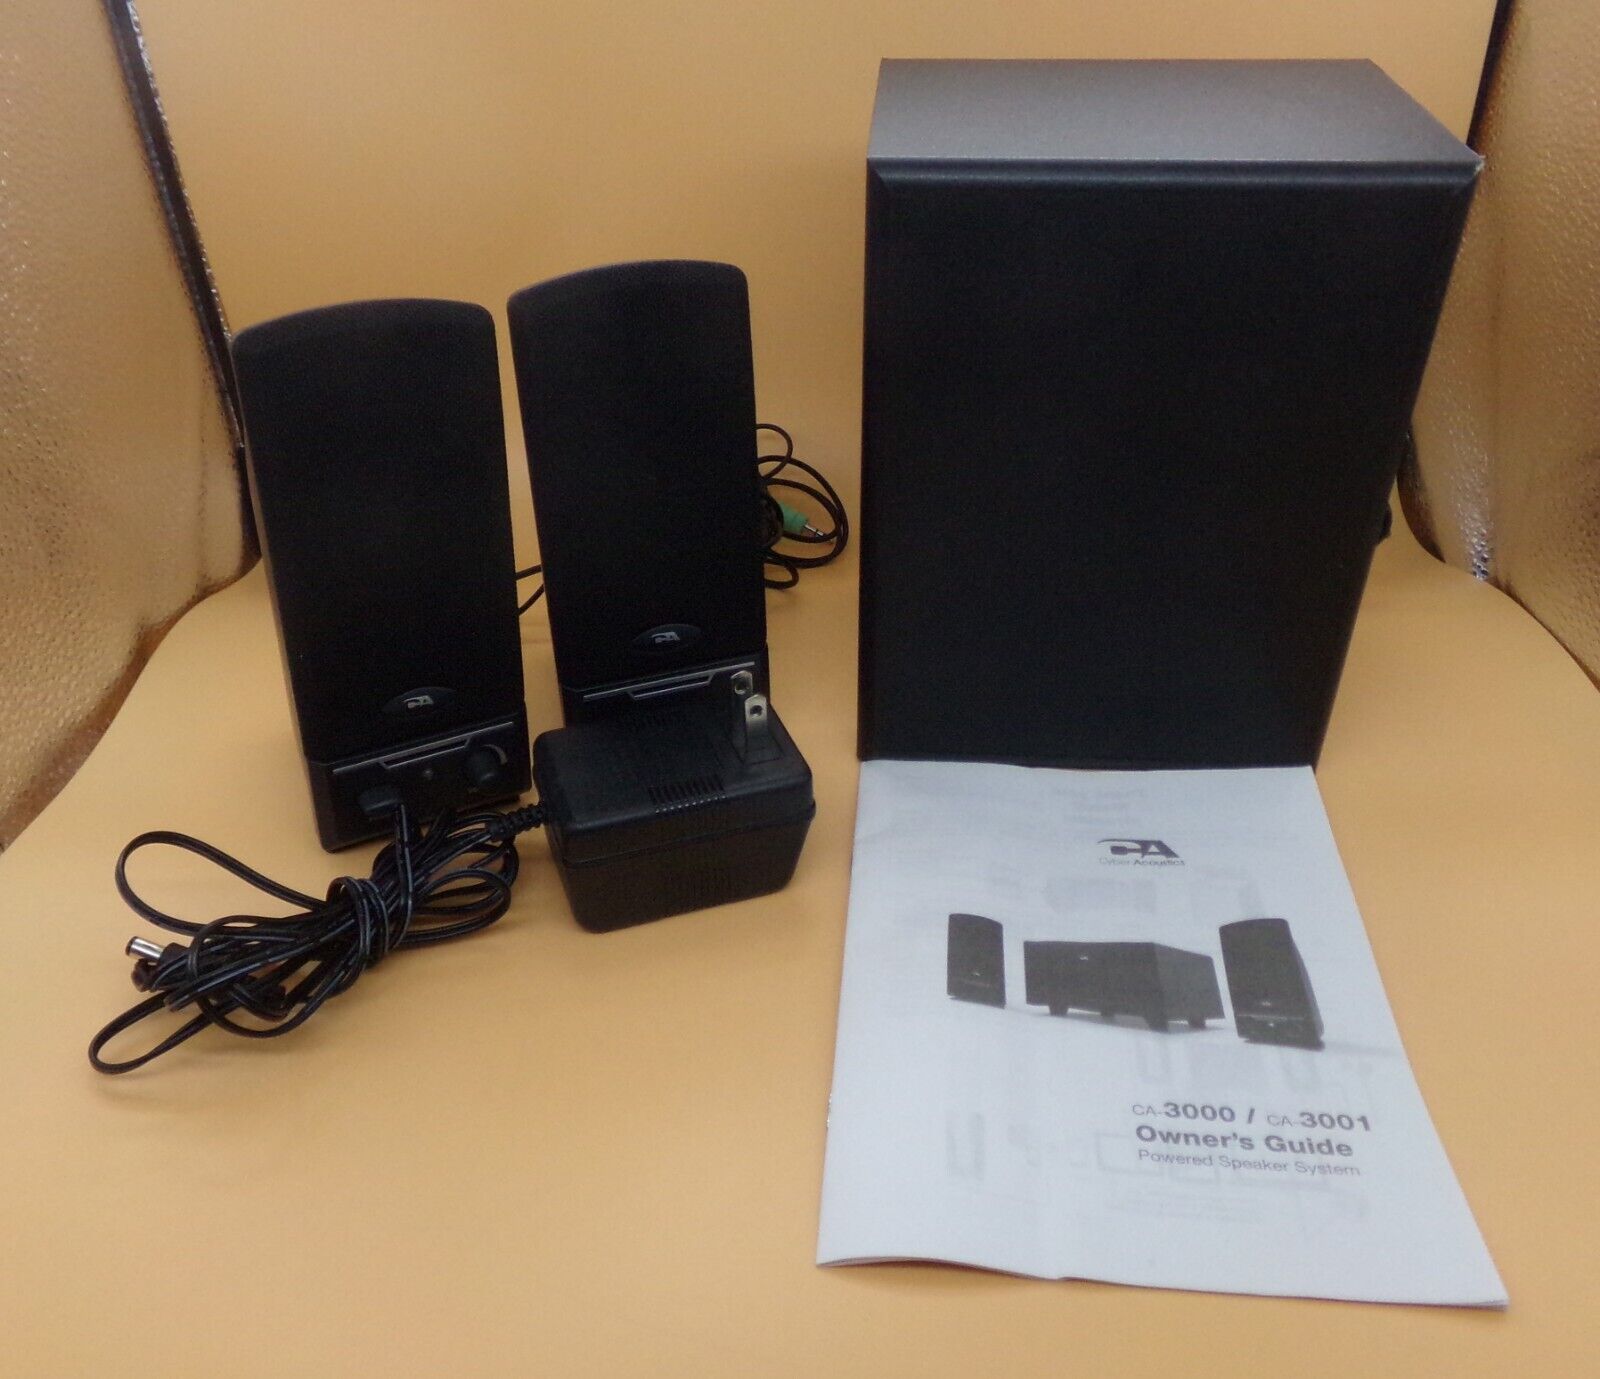 CA-3001 Cyber Acoustics powered Speakers System - Open Box